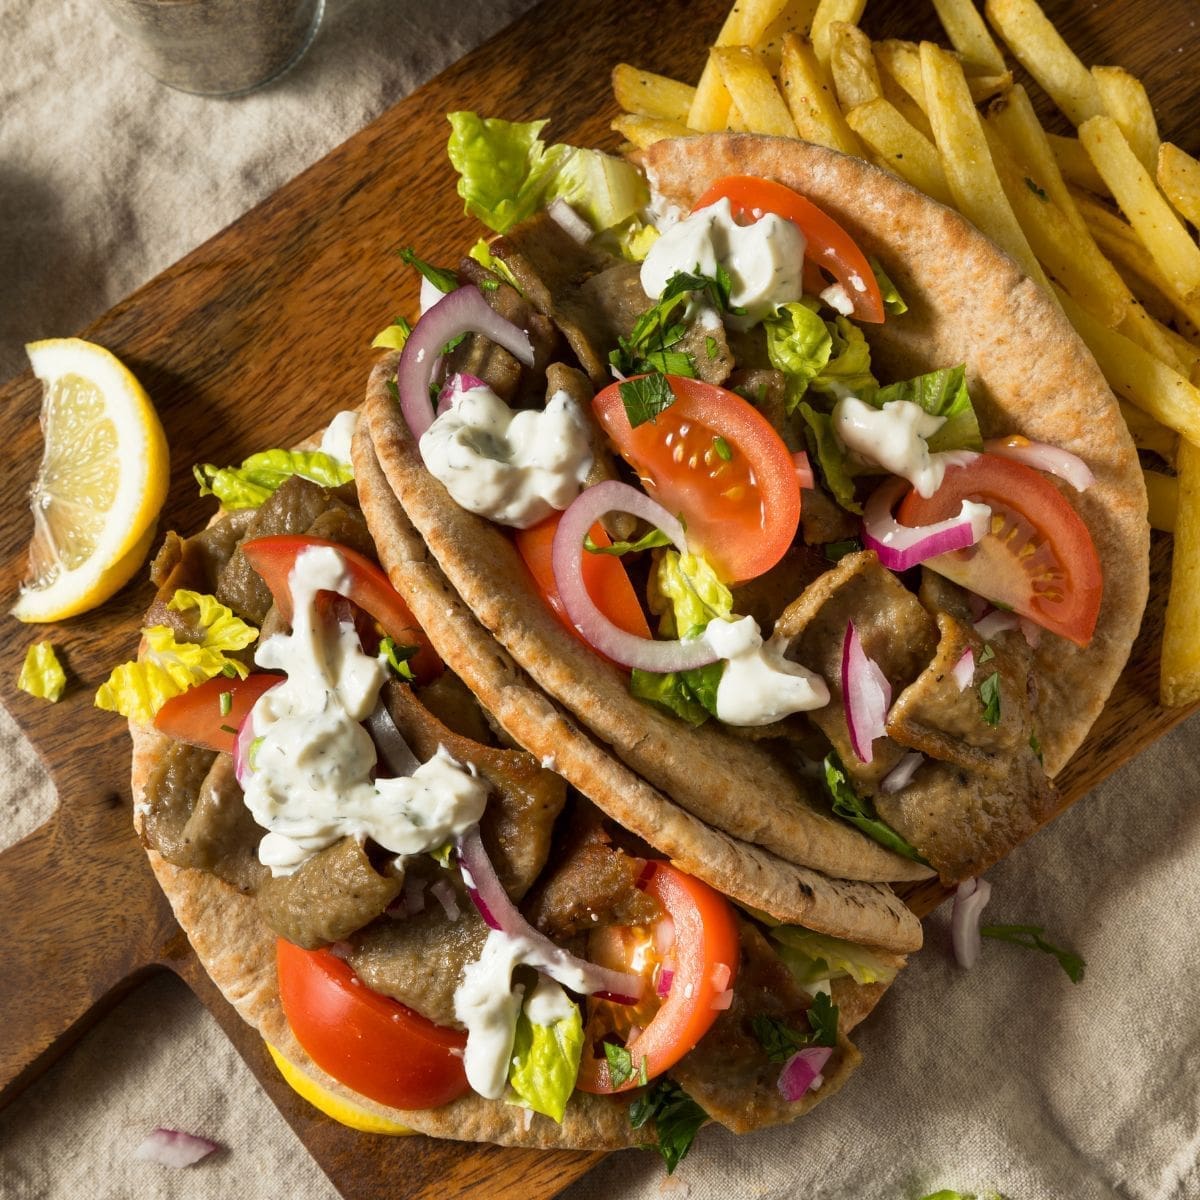 What To Serve With Gyros: 21 Delicious Sides To Feast On